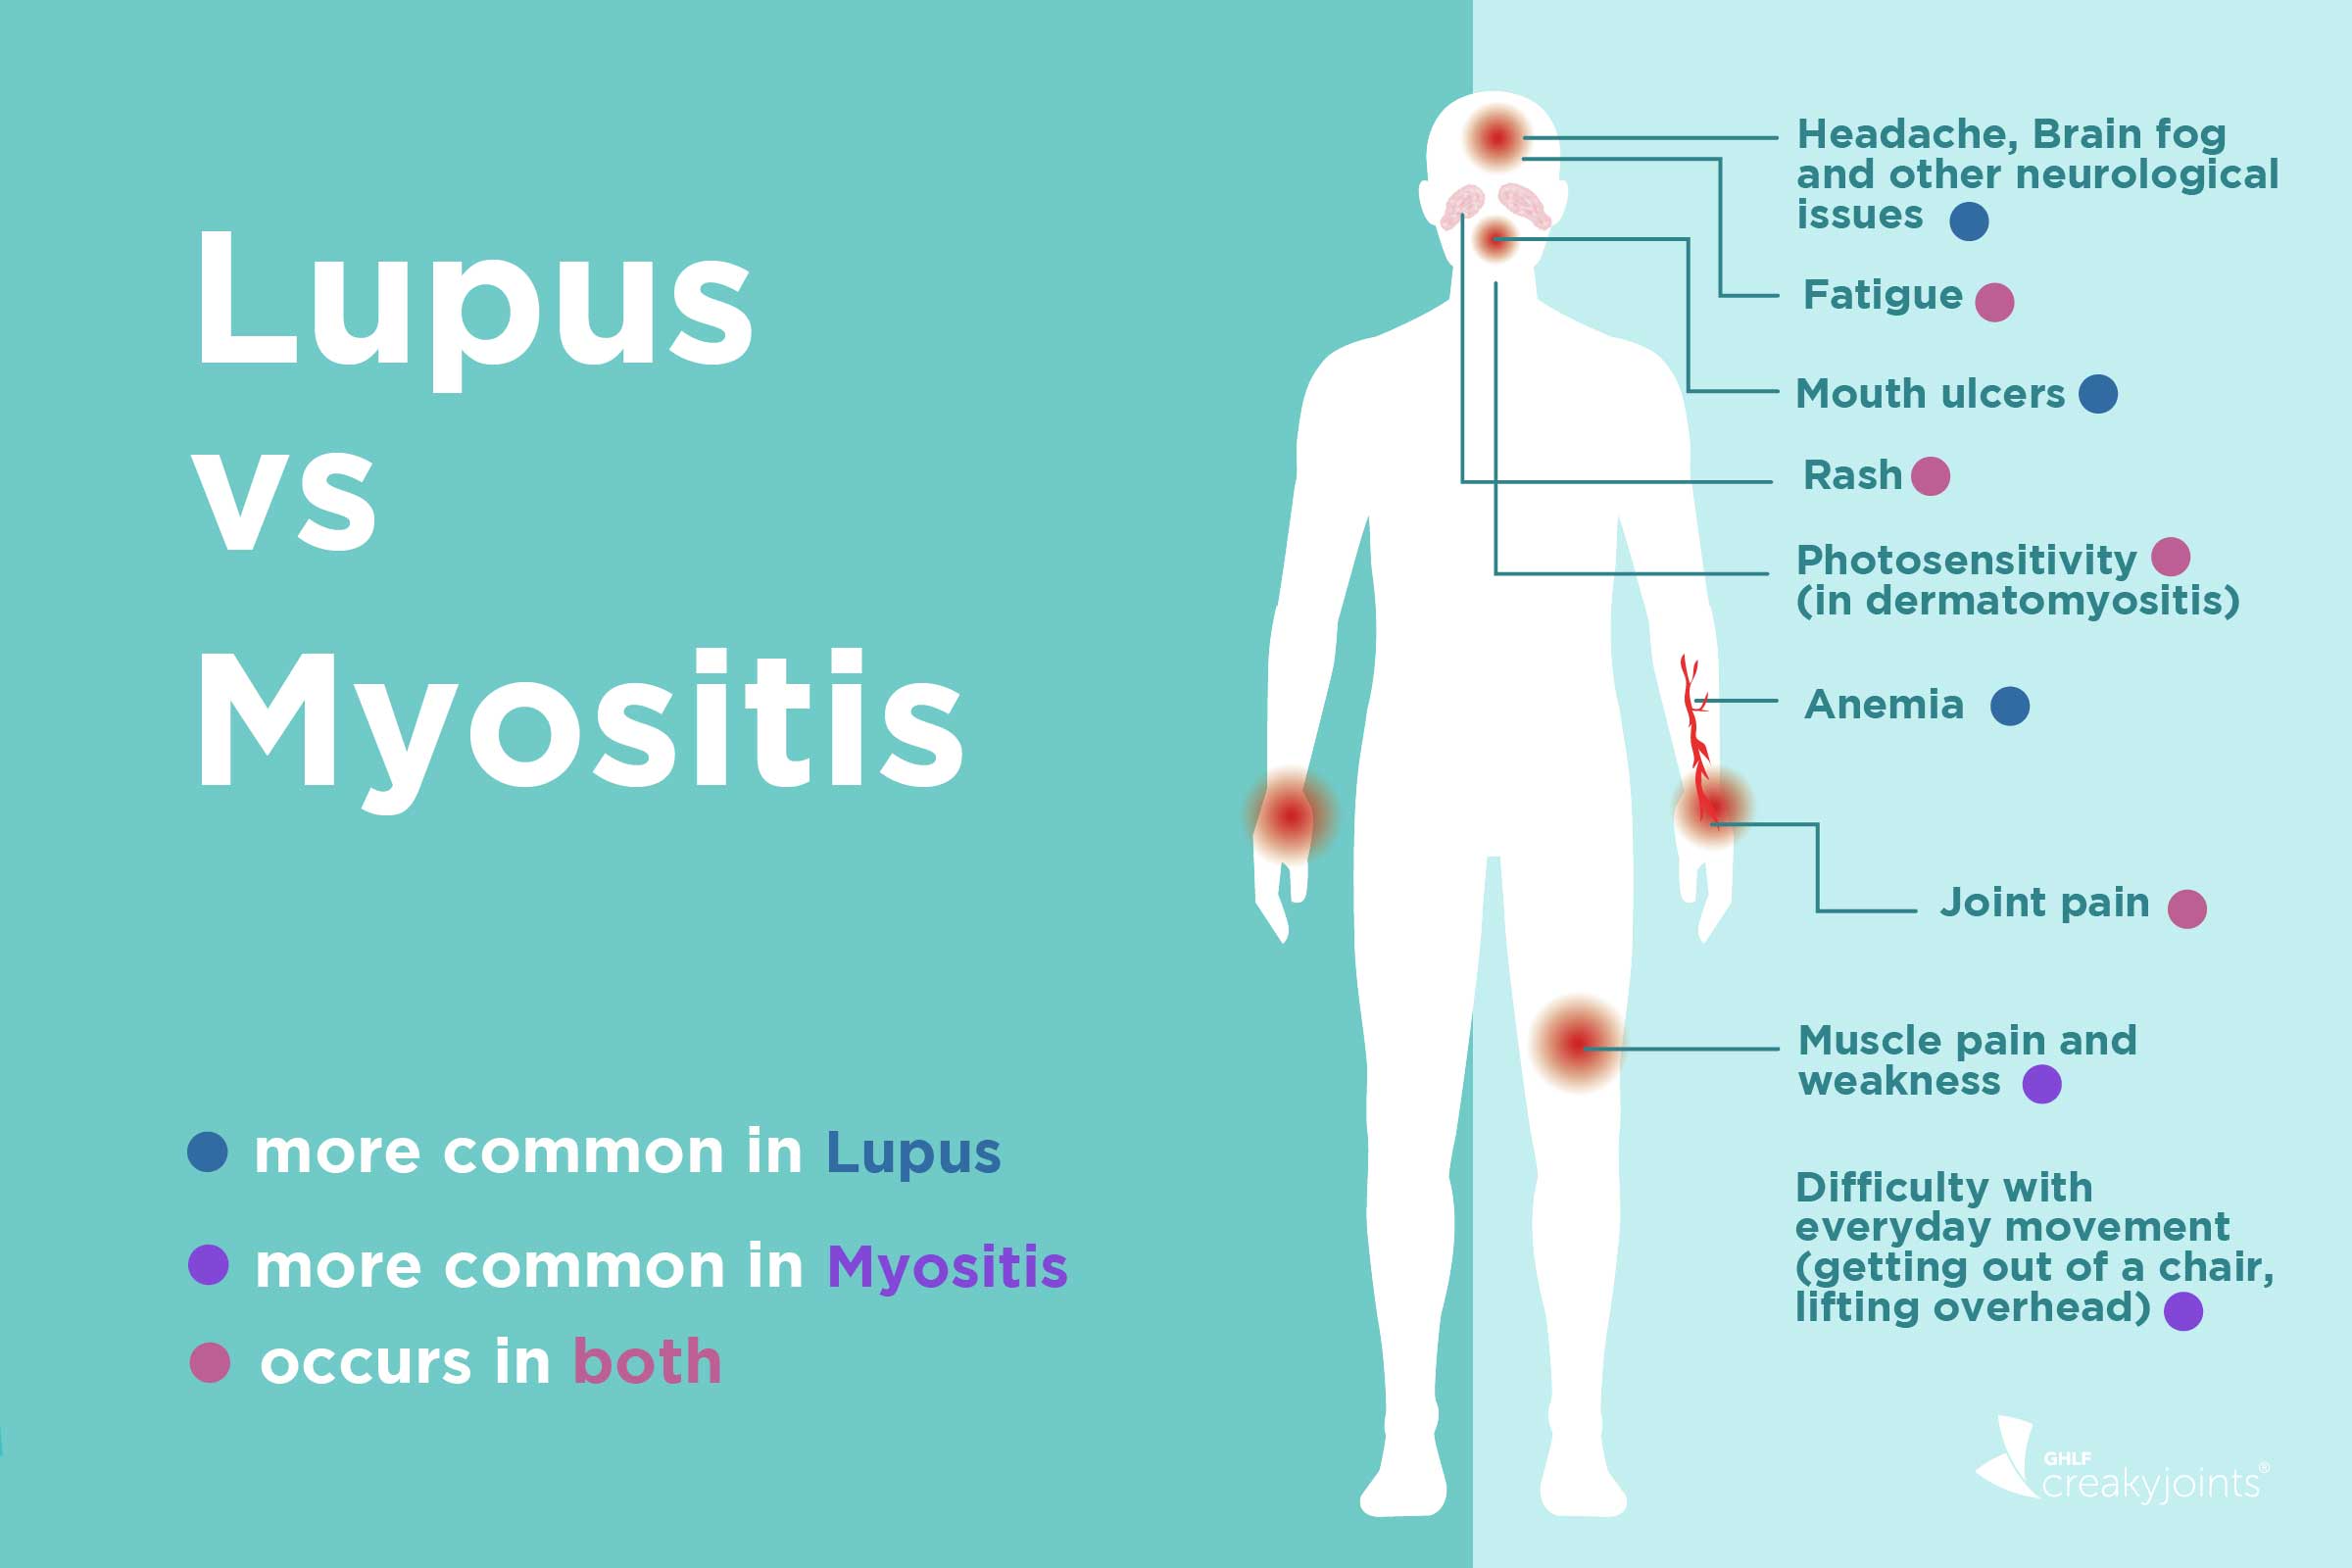 Lupus Myositis: Differences in Symptoms and Treatments